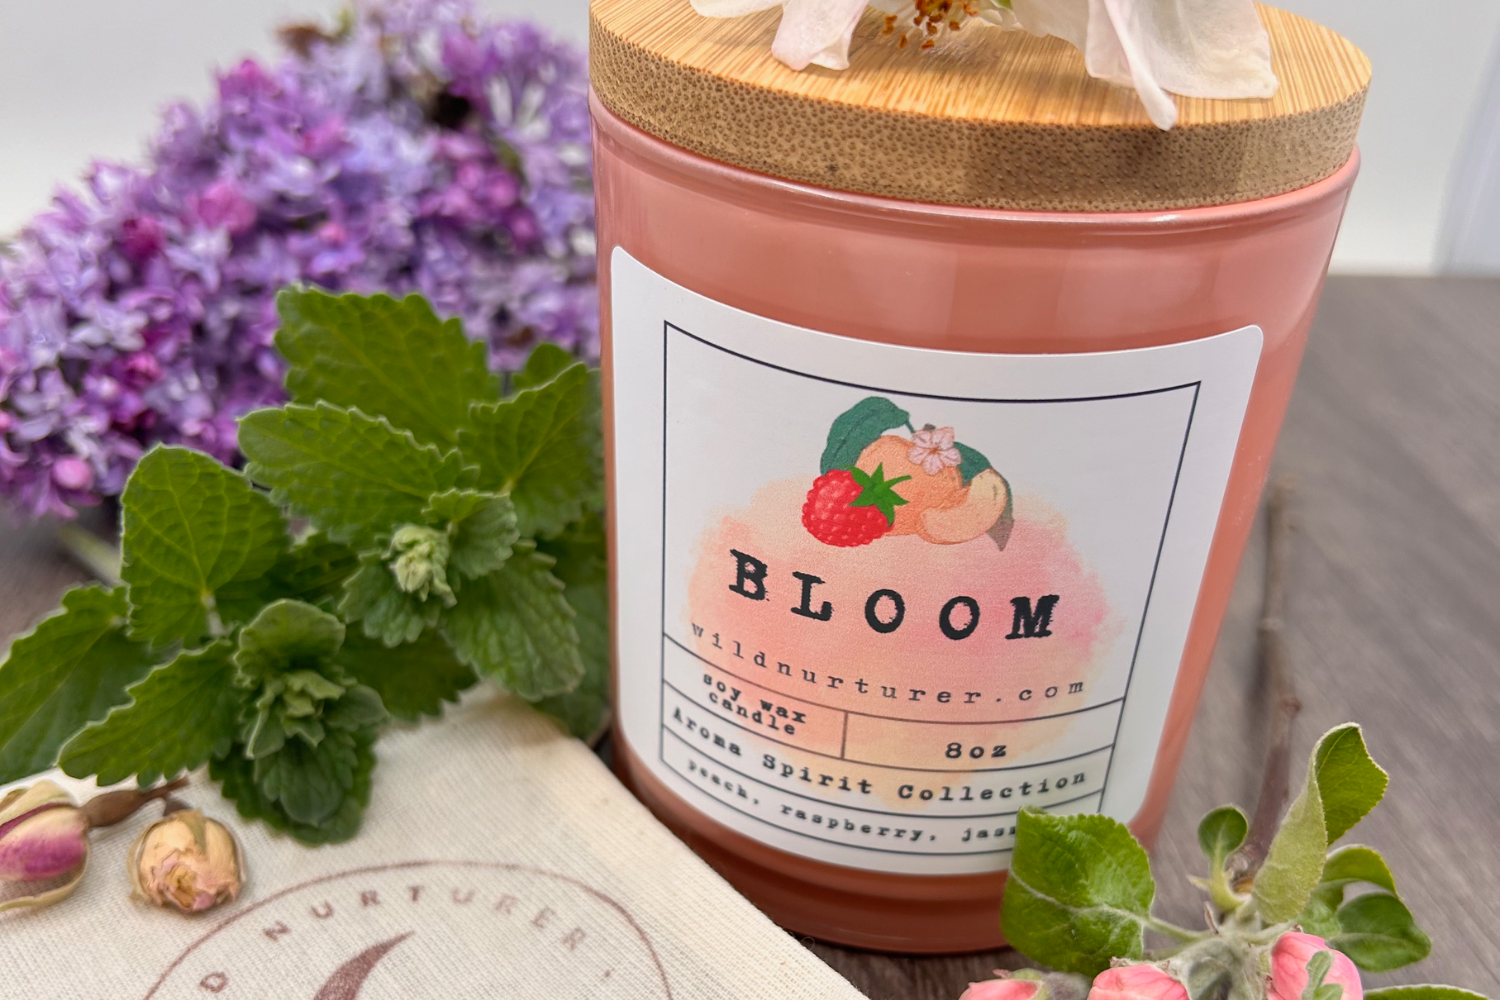 A pink scented candle labeled "Bloom" surrounded by fresh flowers and herbs on a wooden surface.